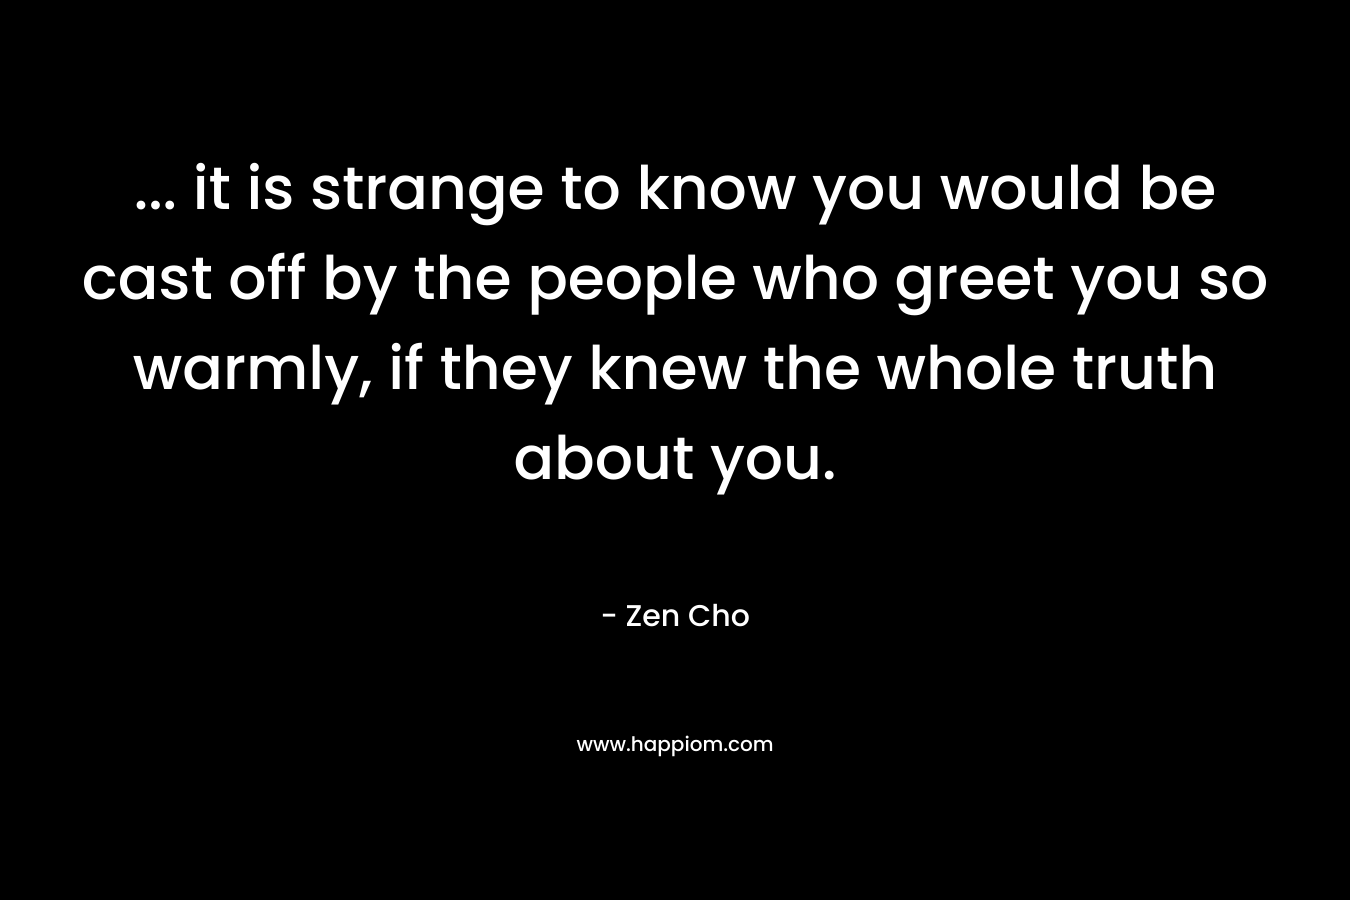 … it is strange to know you would be cast off by the people who greet you so warmly, if they knew the whole truth about you. – Zen Cho